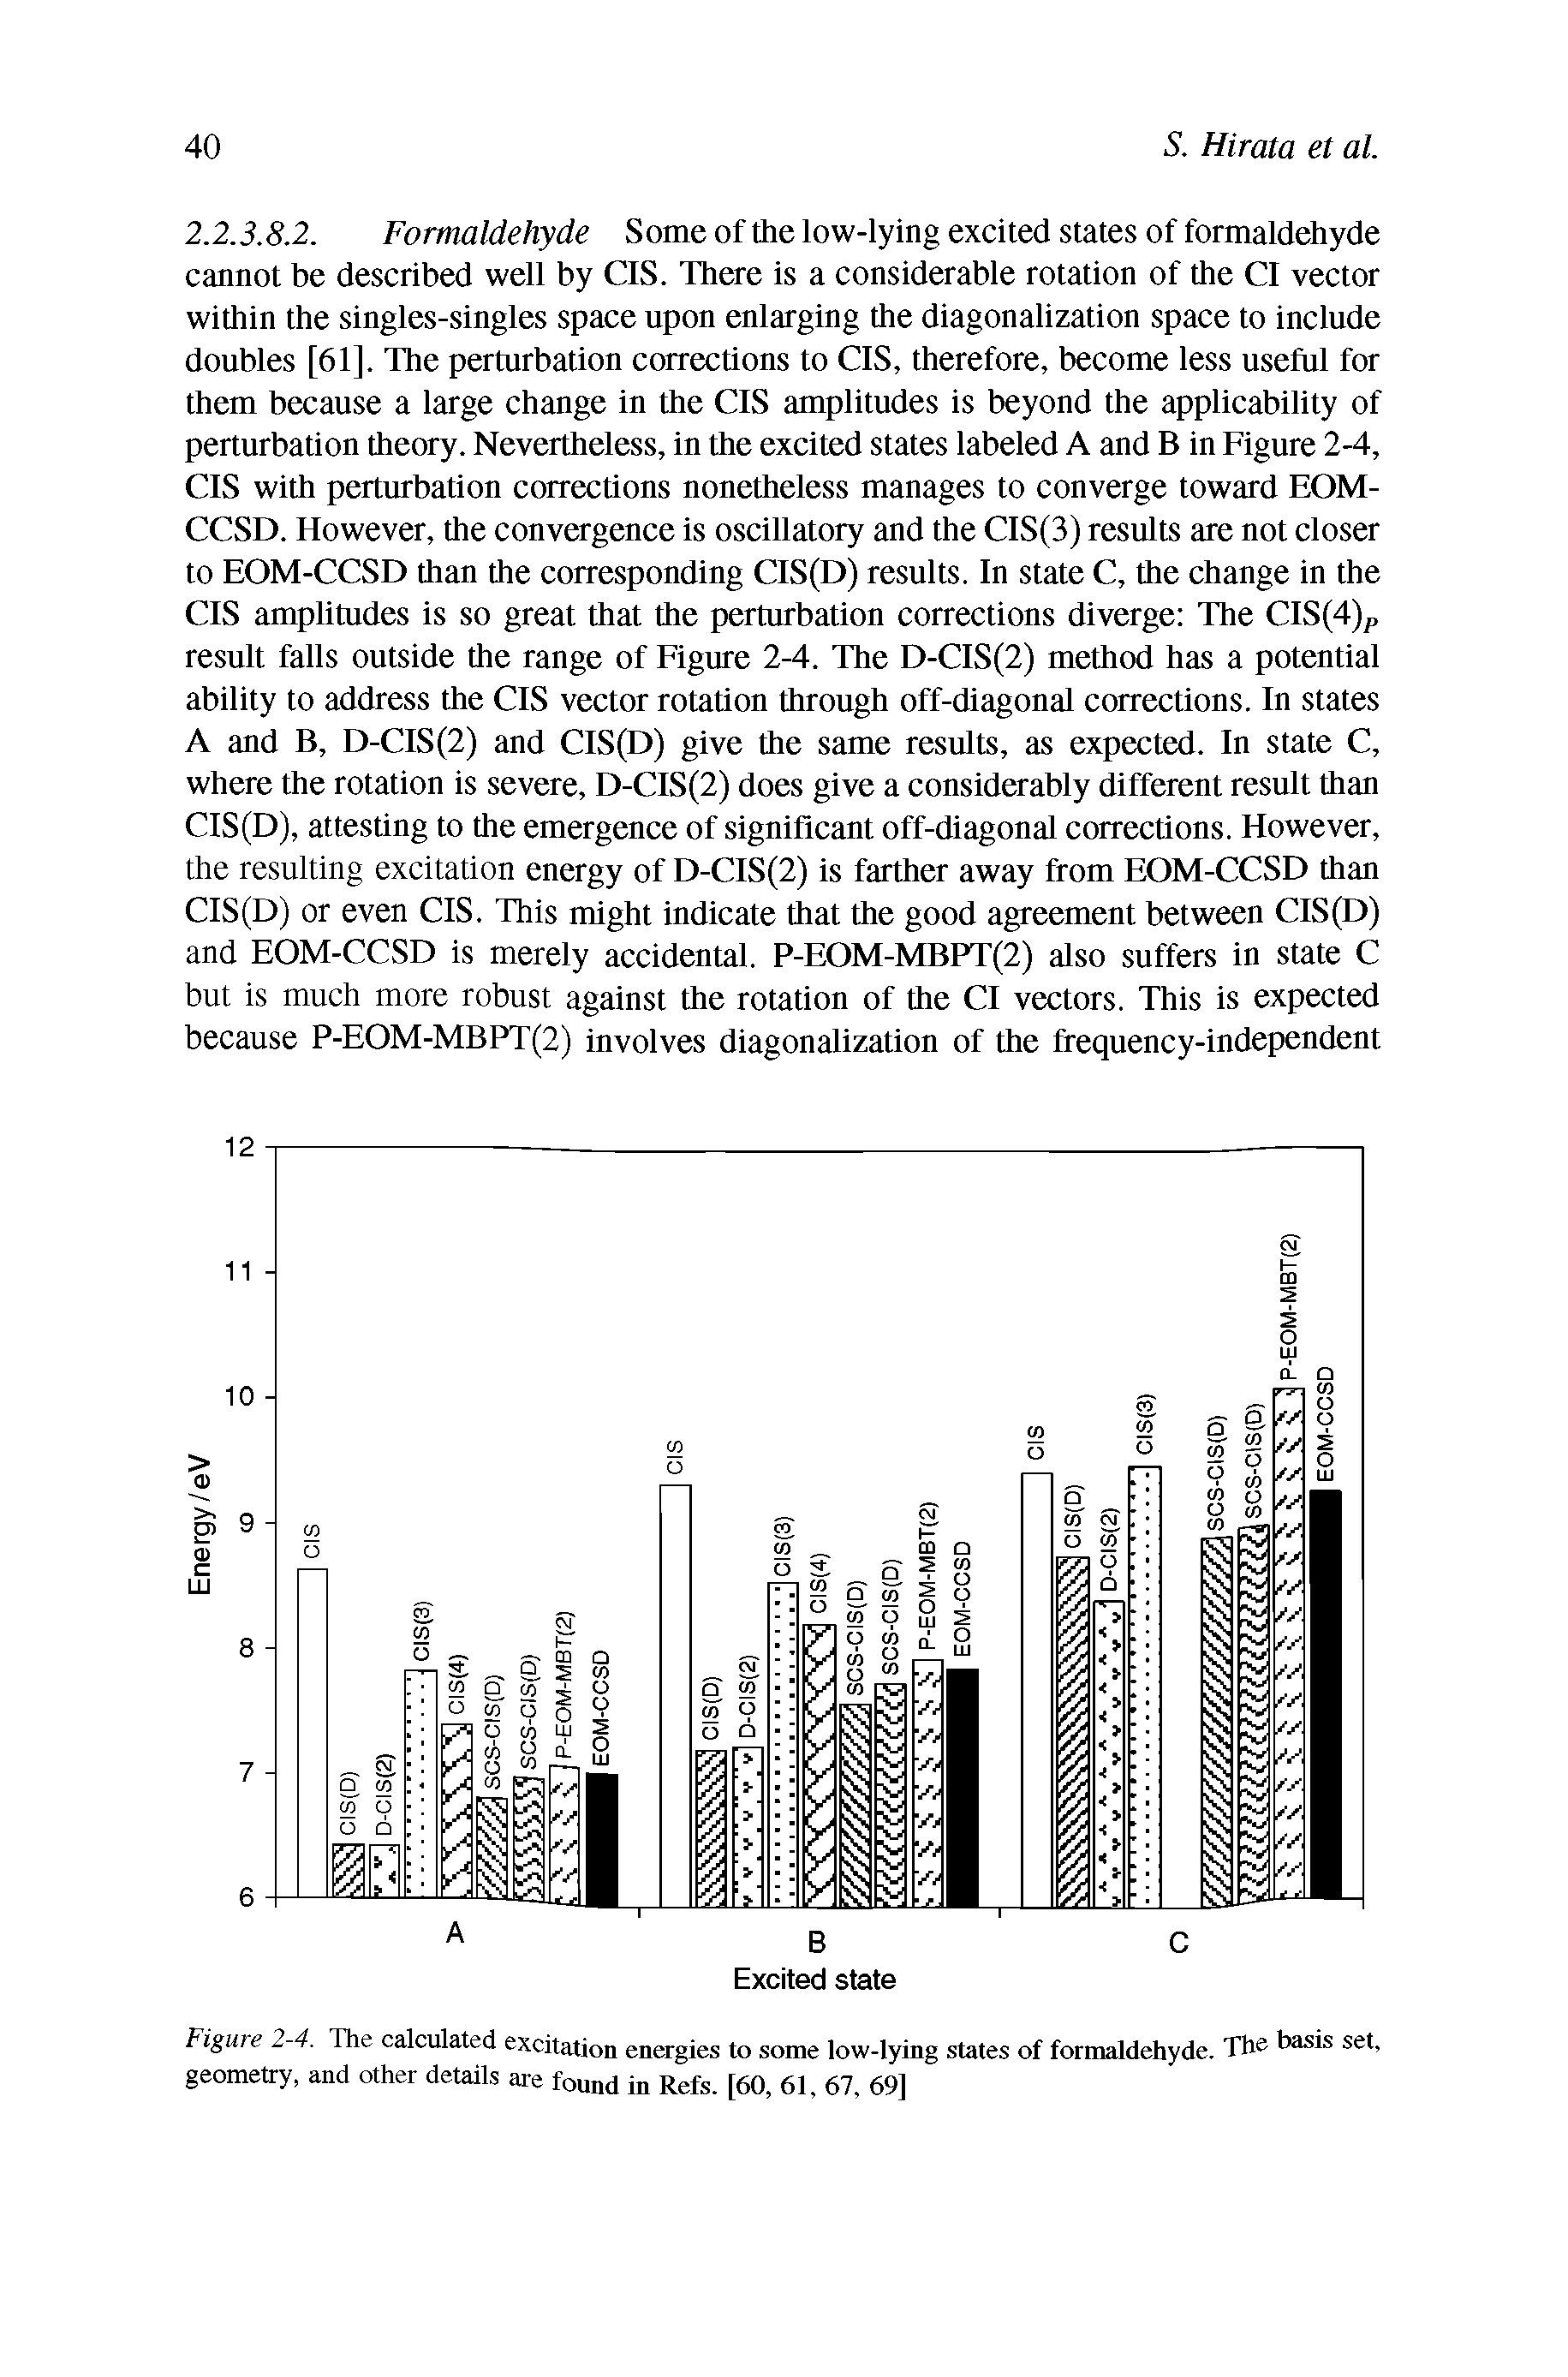 Figure 2 4. The calculated excitation energies to some low-lying states of formaldehyde. The basis set, geometry, and other details are found in Refs. [60, 61, 67, 69]...